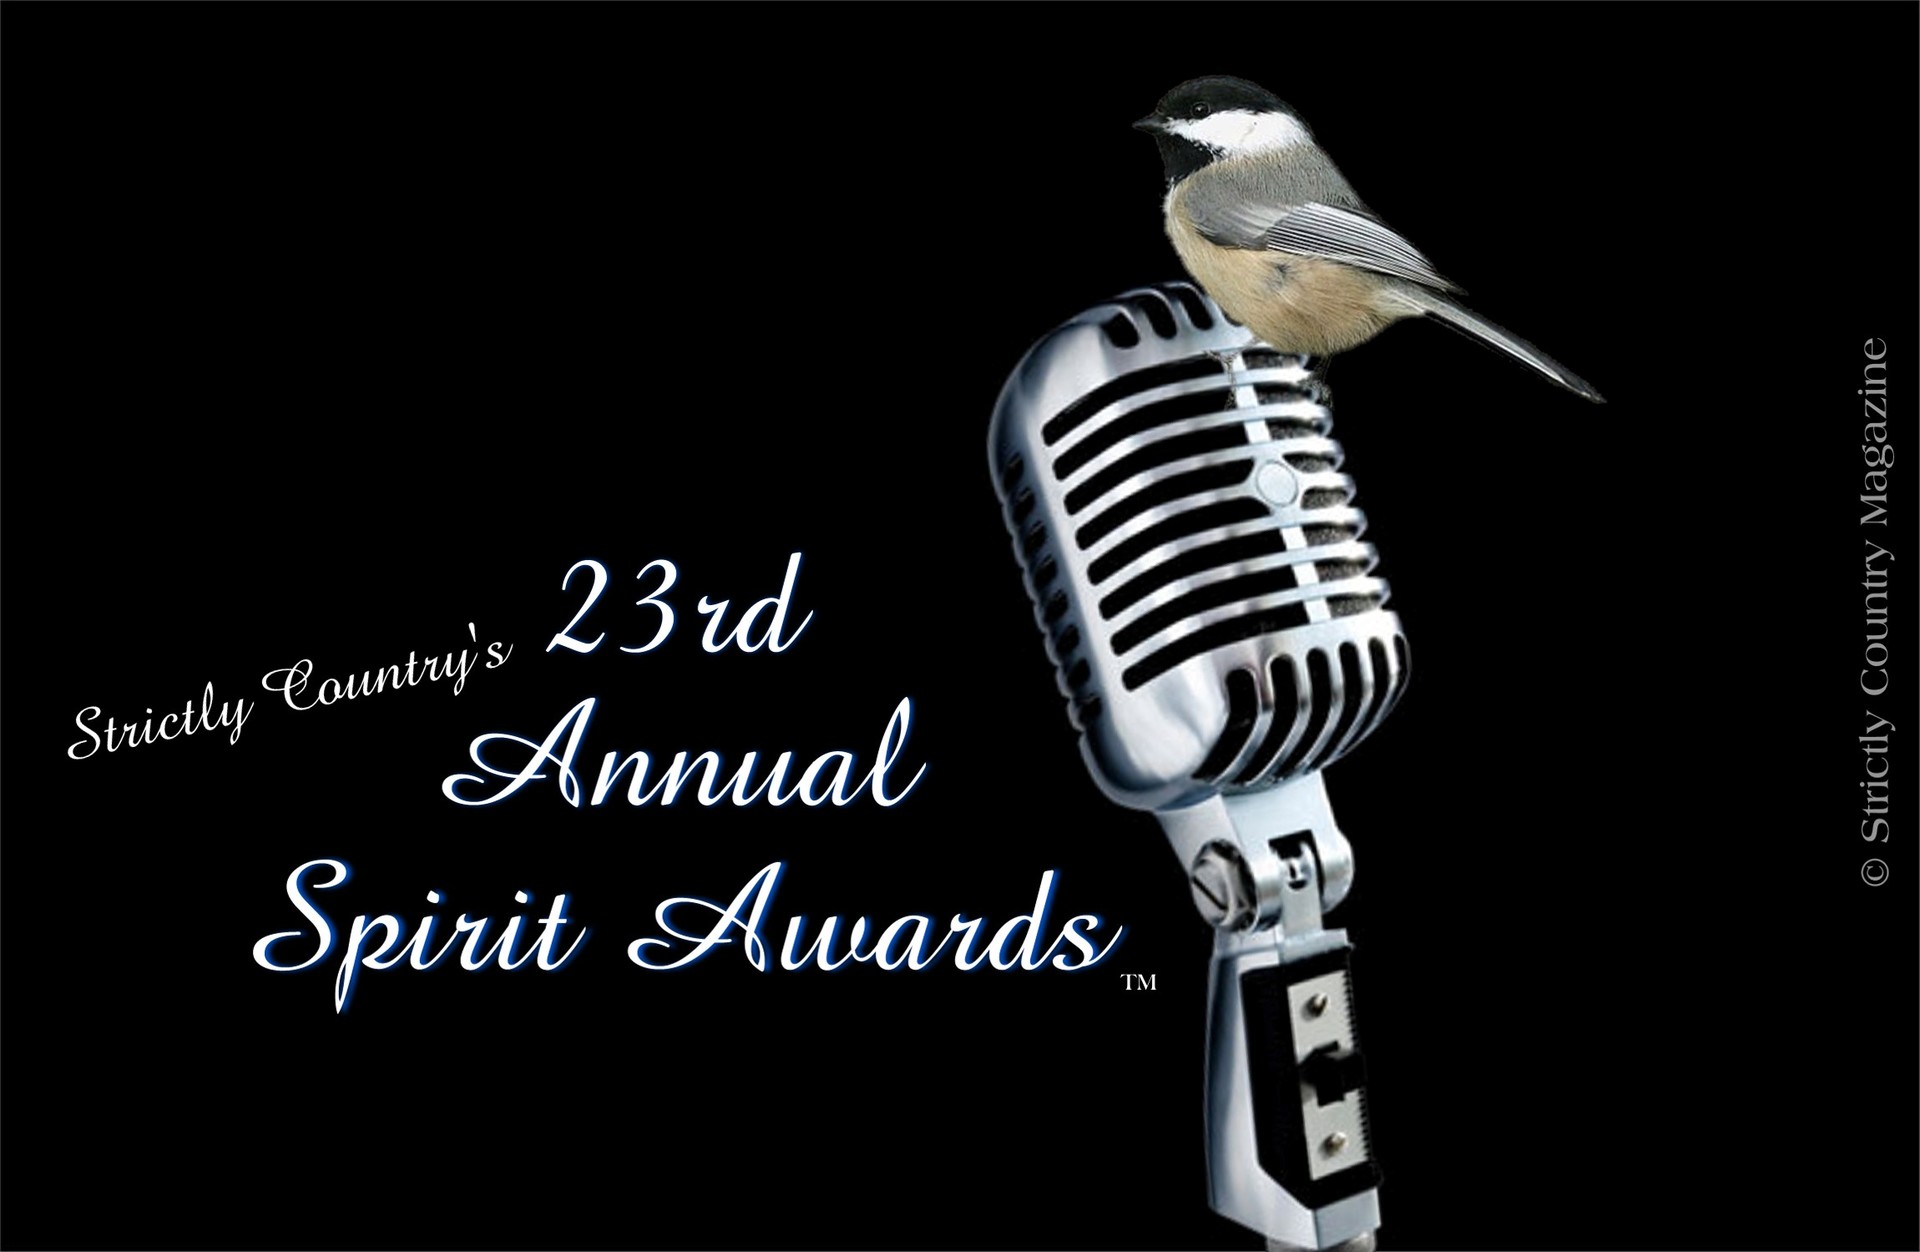 Strictly Country Magazine copyright 23rd Annual Spirit Awards official logo